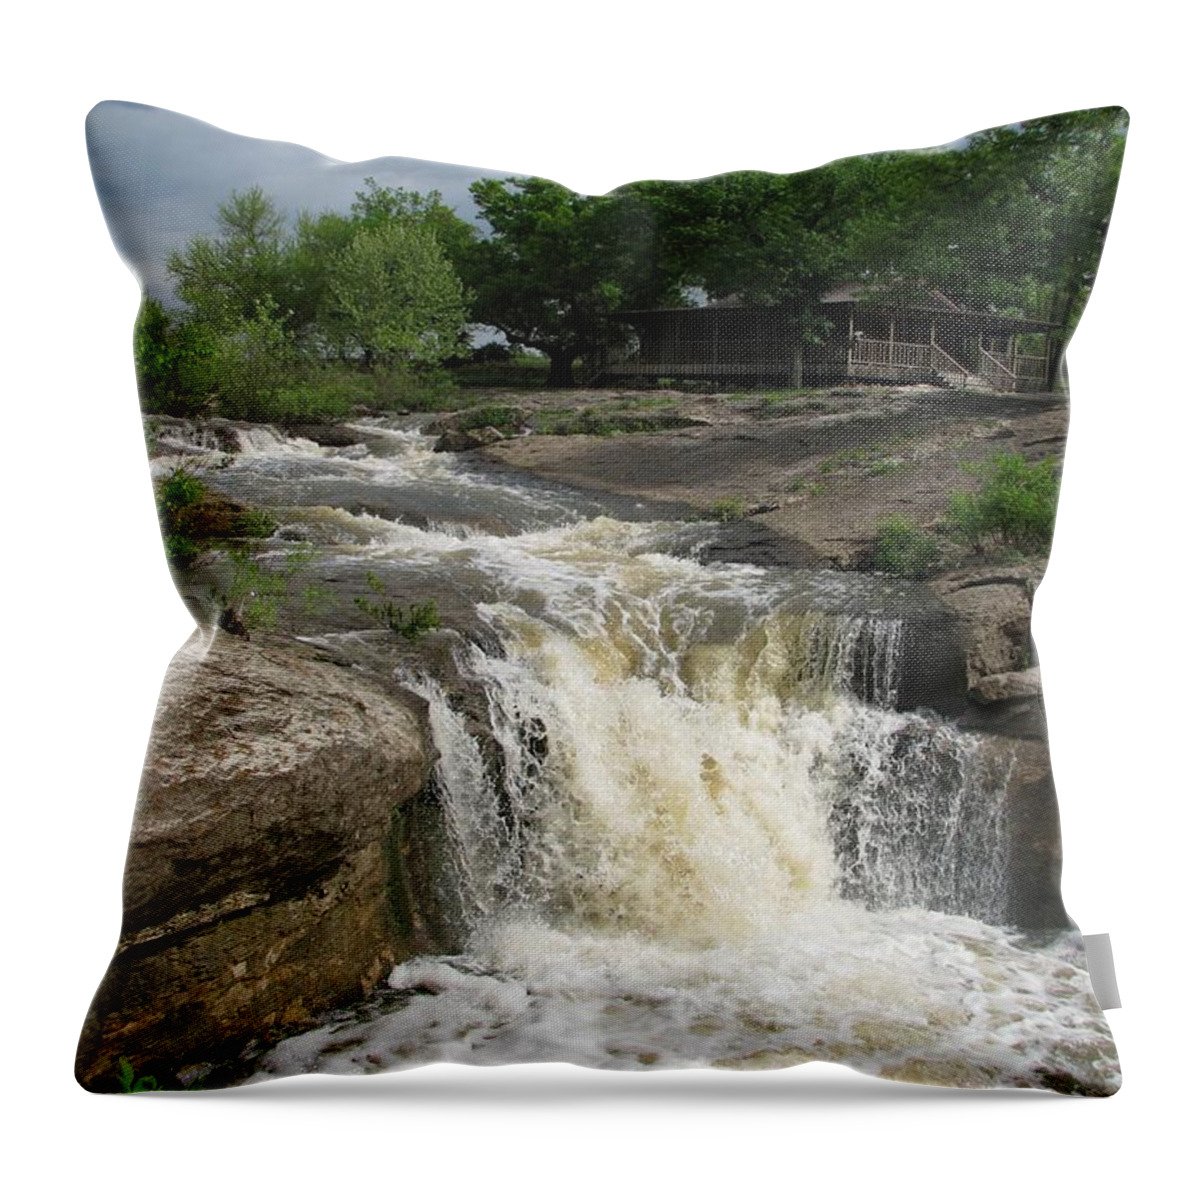 Butcher Falls Throw Pillow featuring the photograph Butcher Falls by Keith Stokes